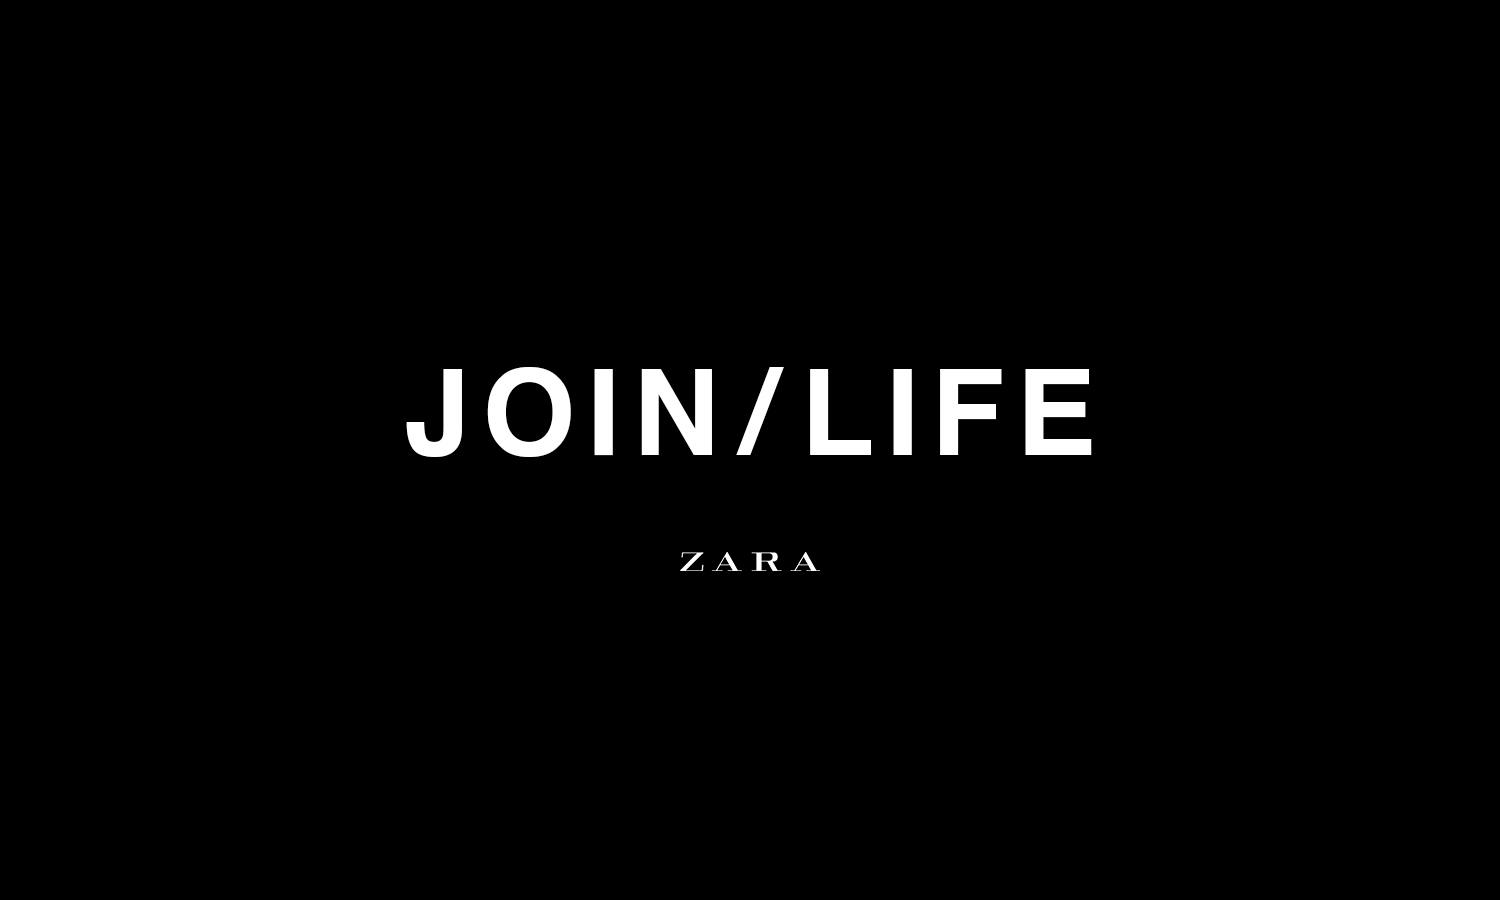 Join life